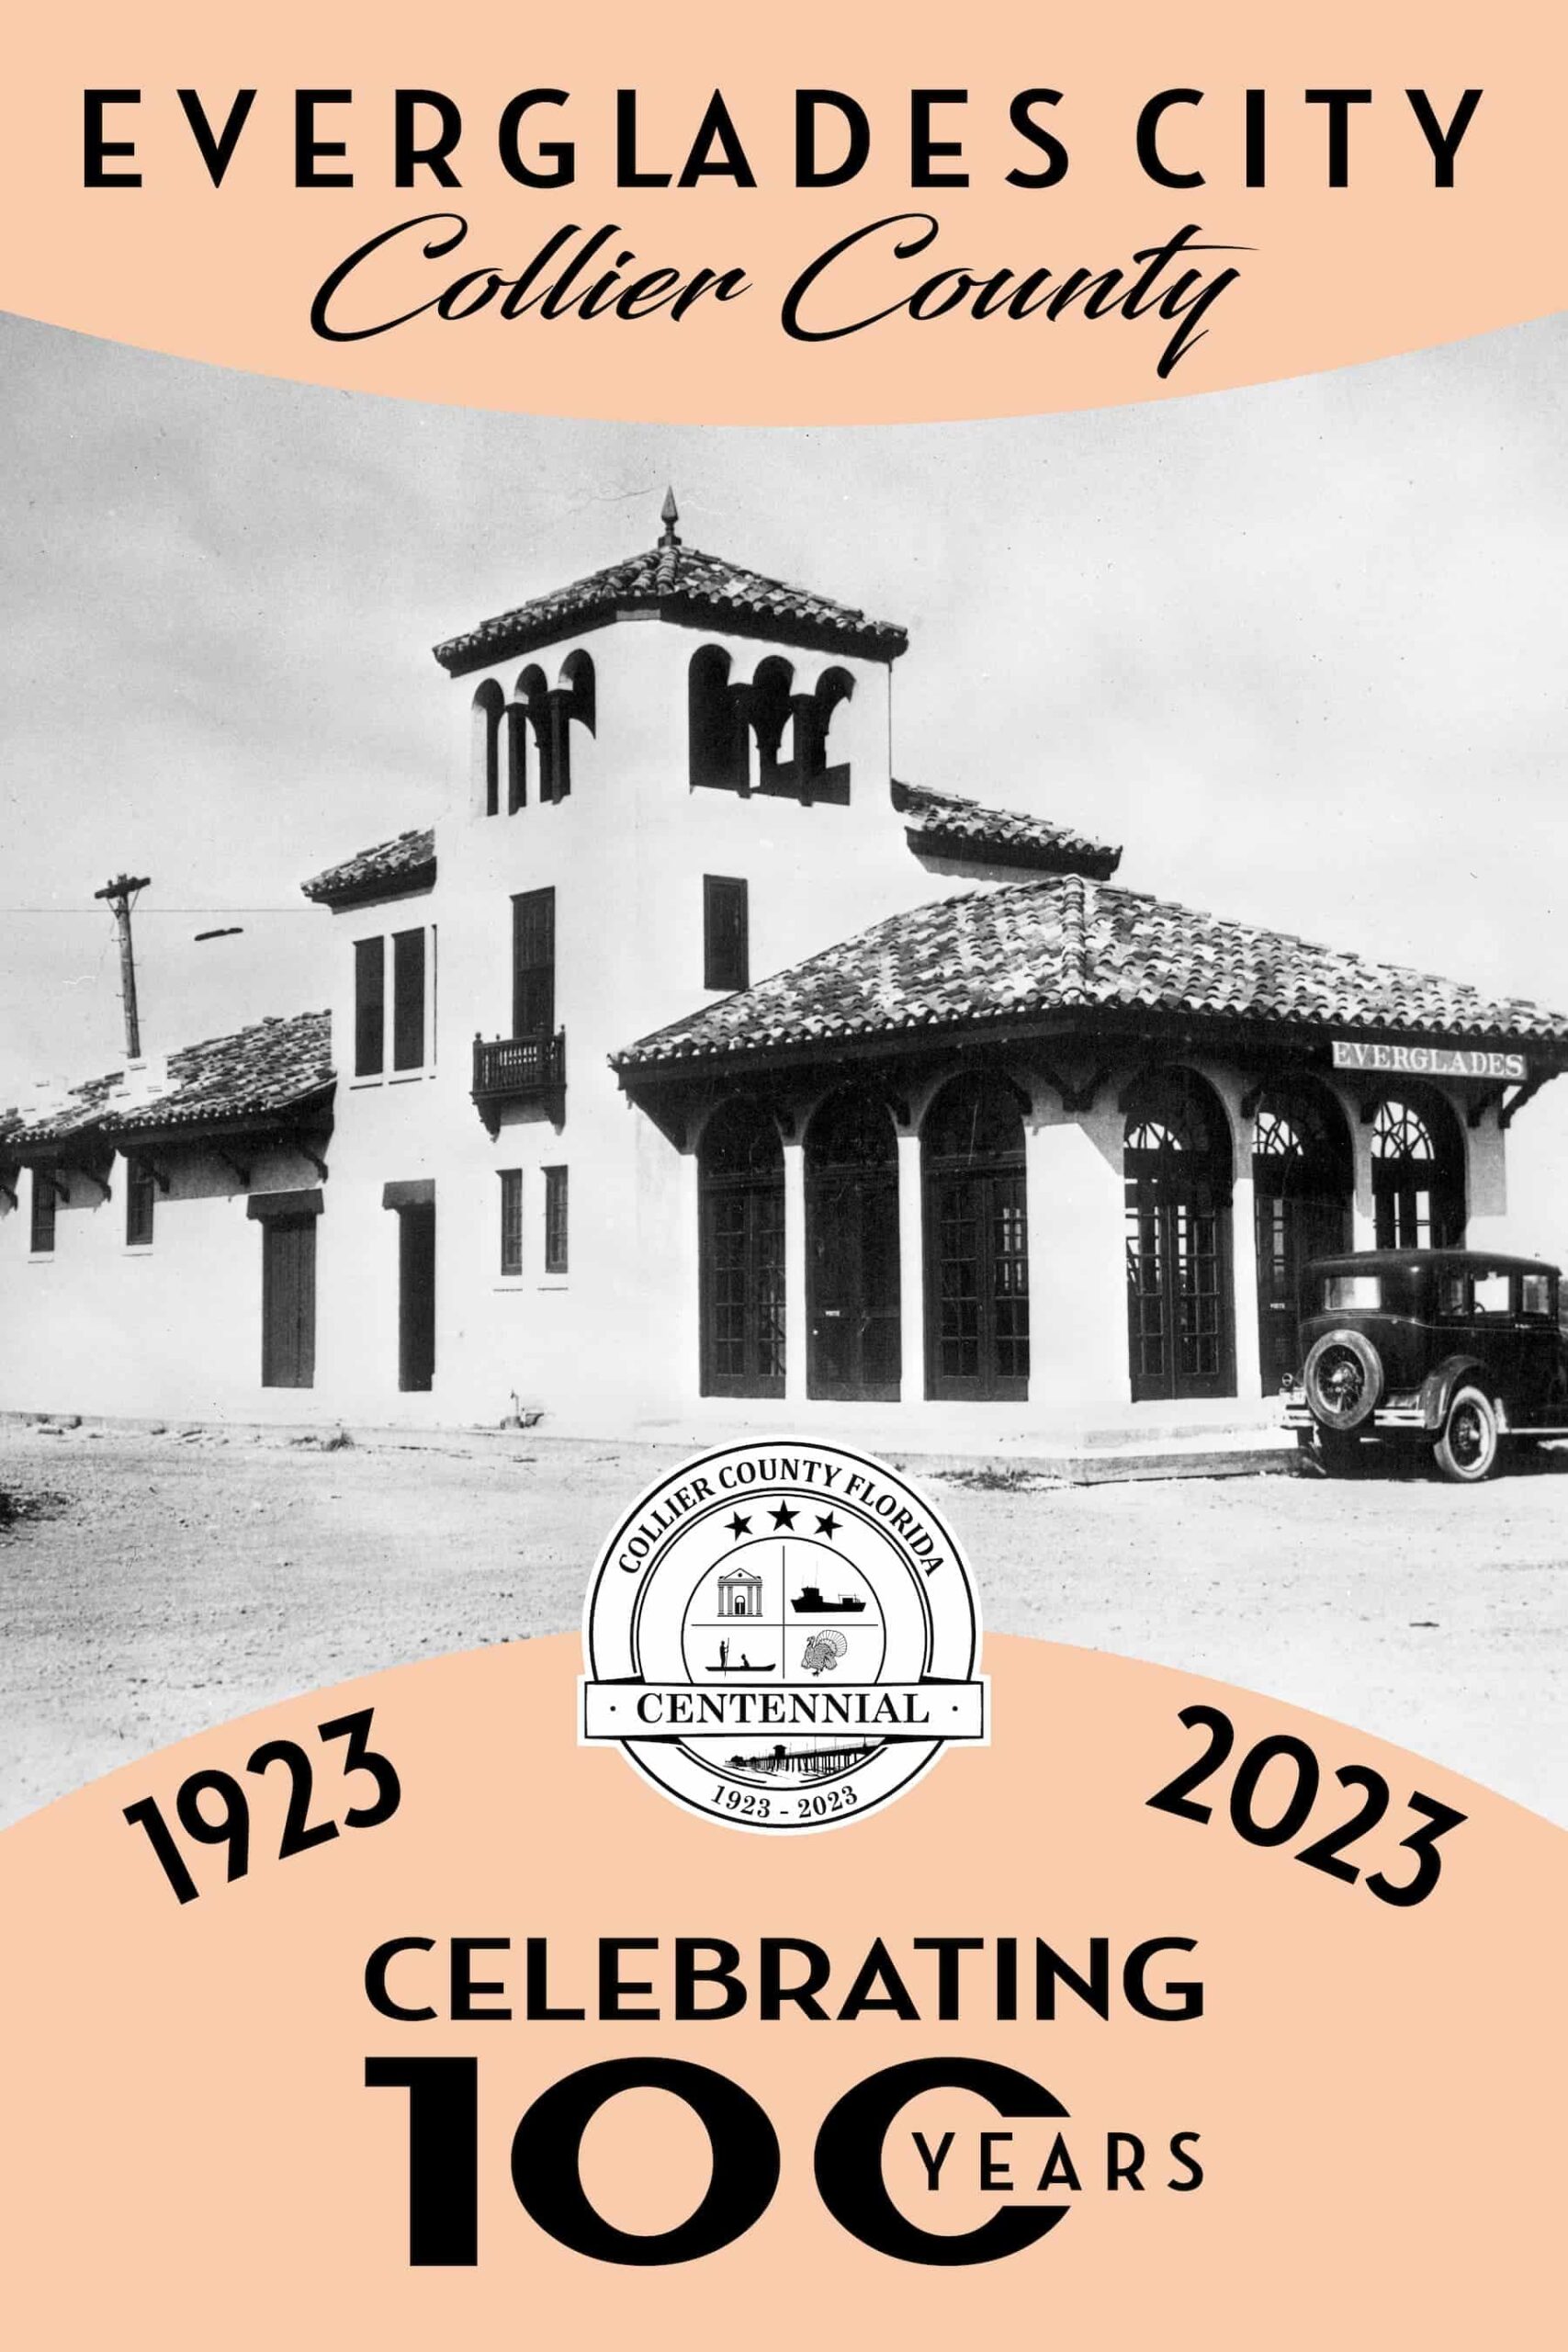 Celebrating 100 years - A historic building in Everglades City